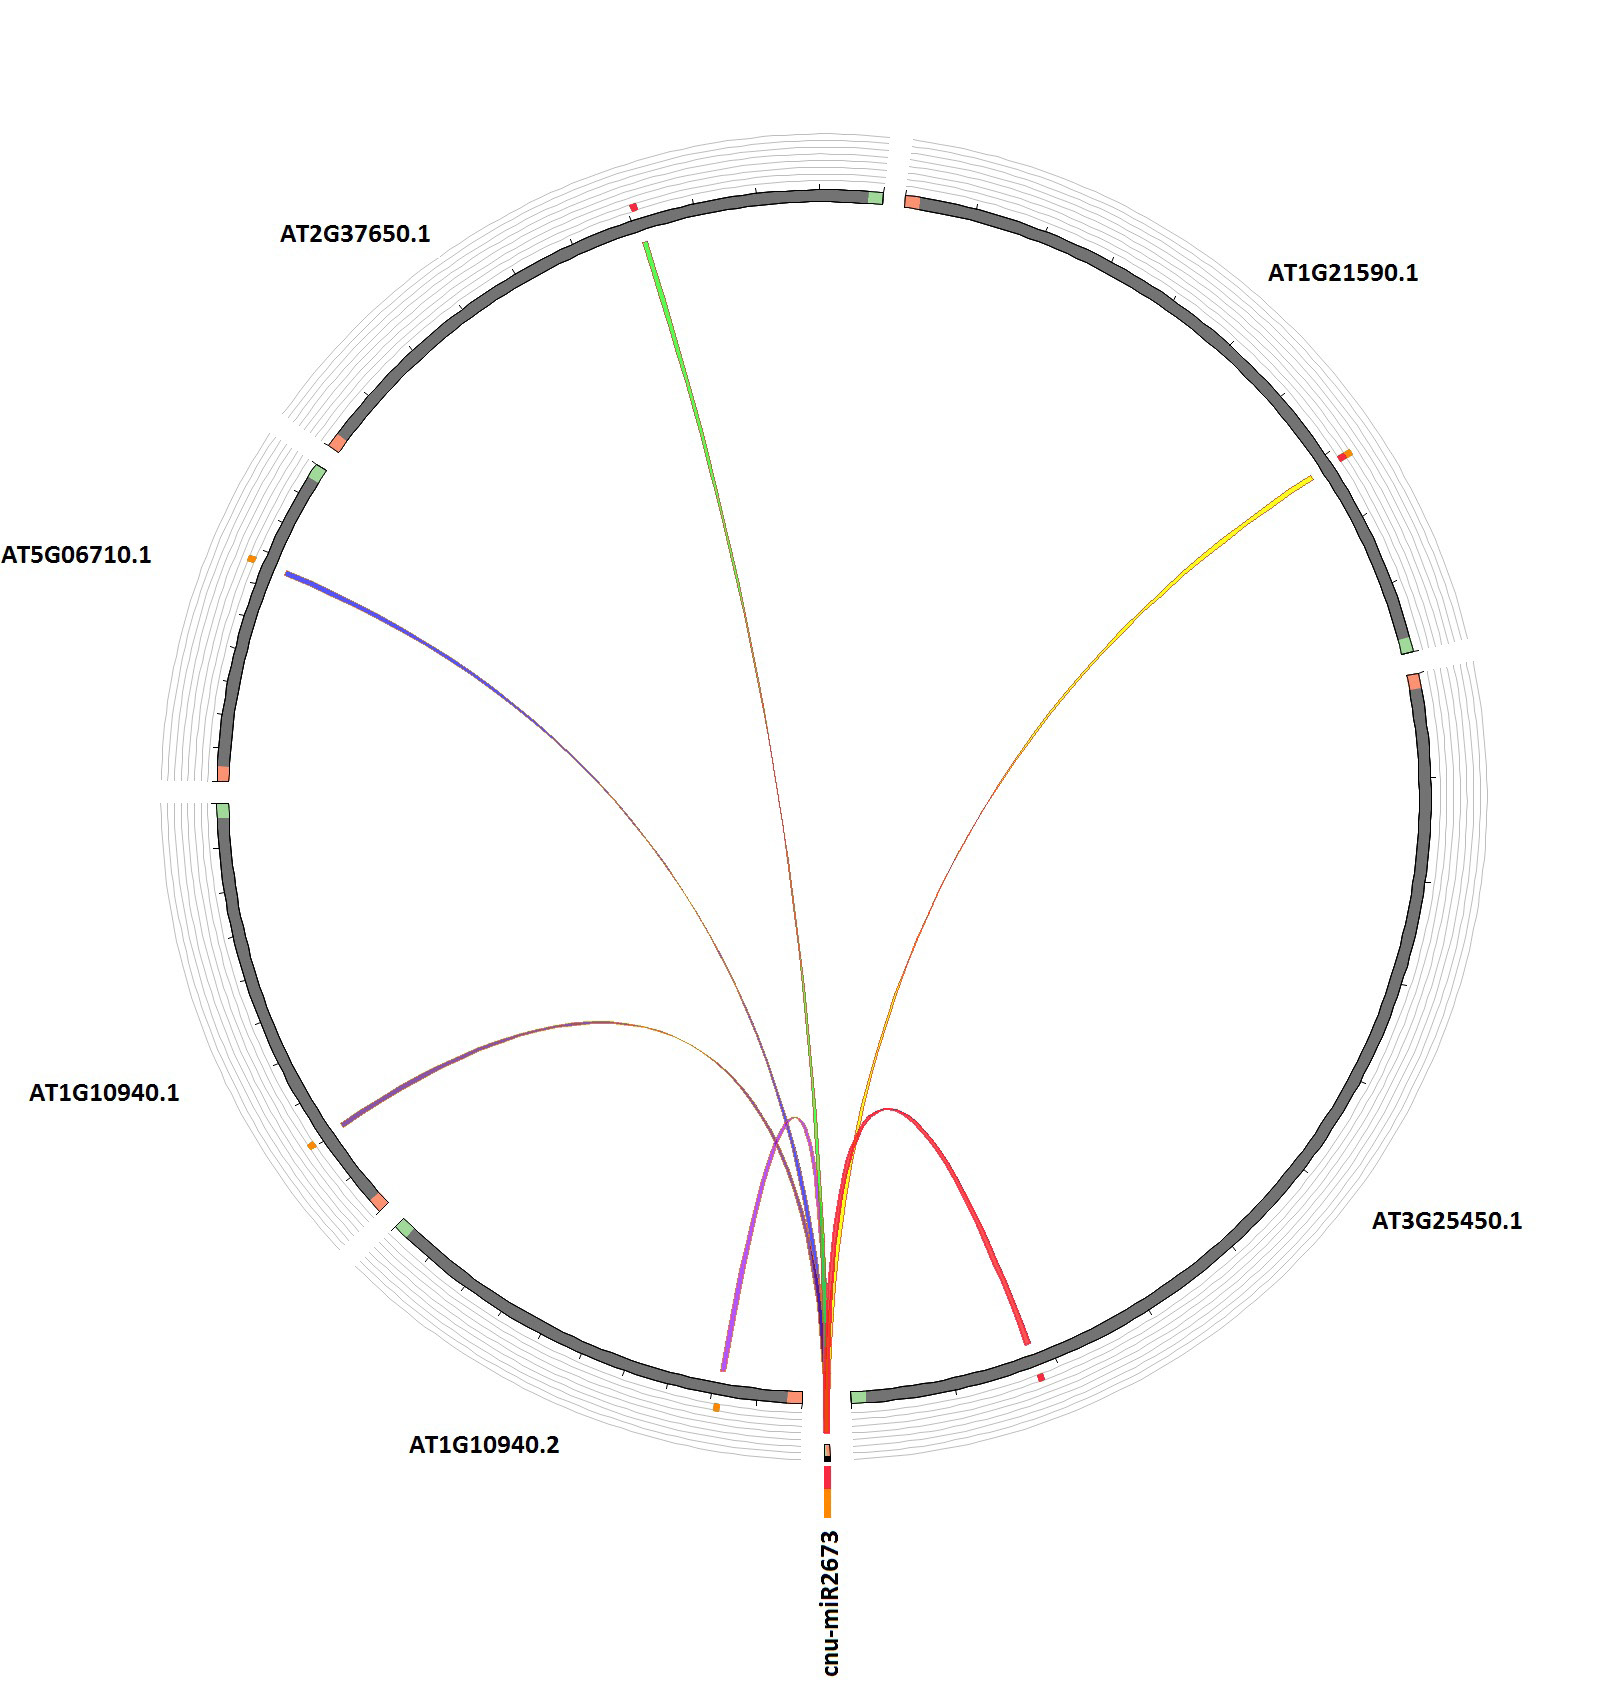 Figure 4: Circos plot showing Cnu-miR2673 and its target genes: The coloured ribbons indicate the genes targeted by the coconut microRNA. The labels represent the target genes flanked by green (start of the target sequence) and orange (end of target sequence) blocks